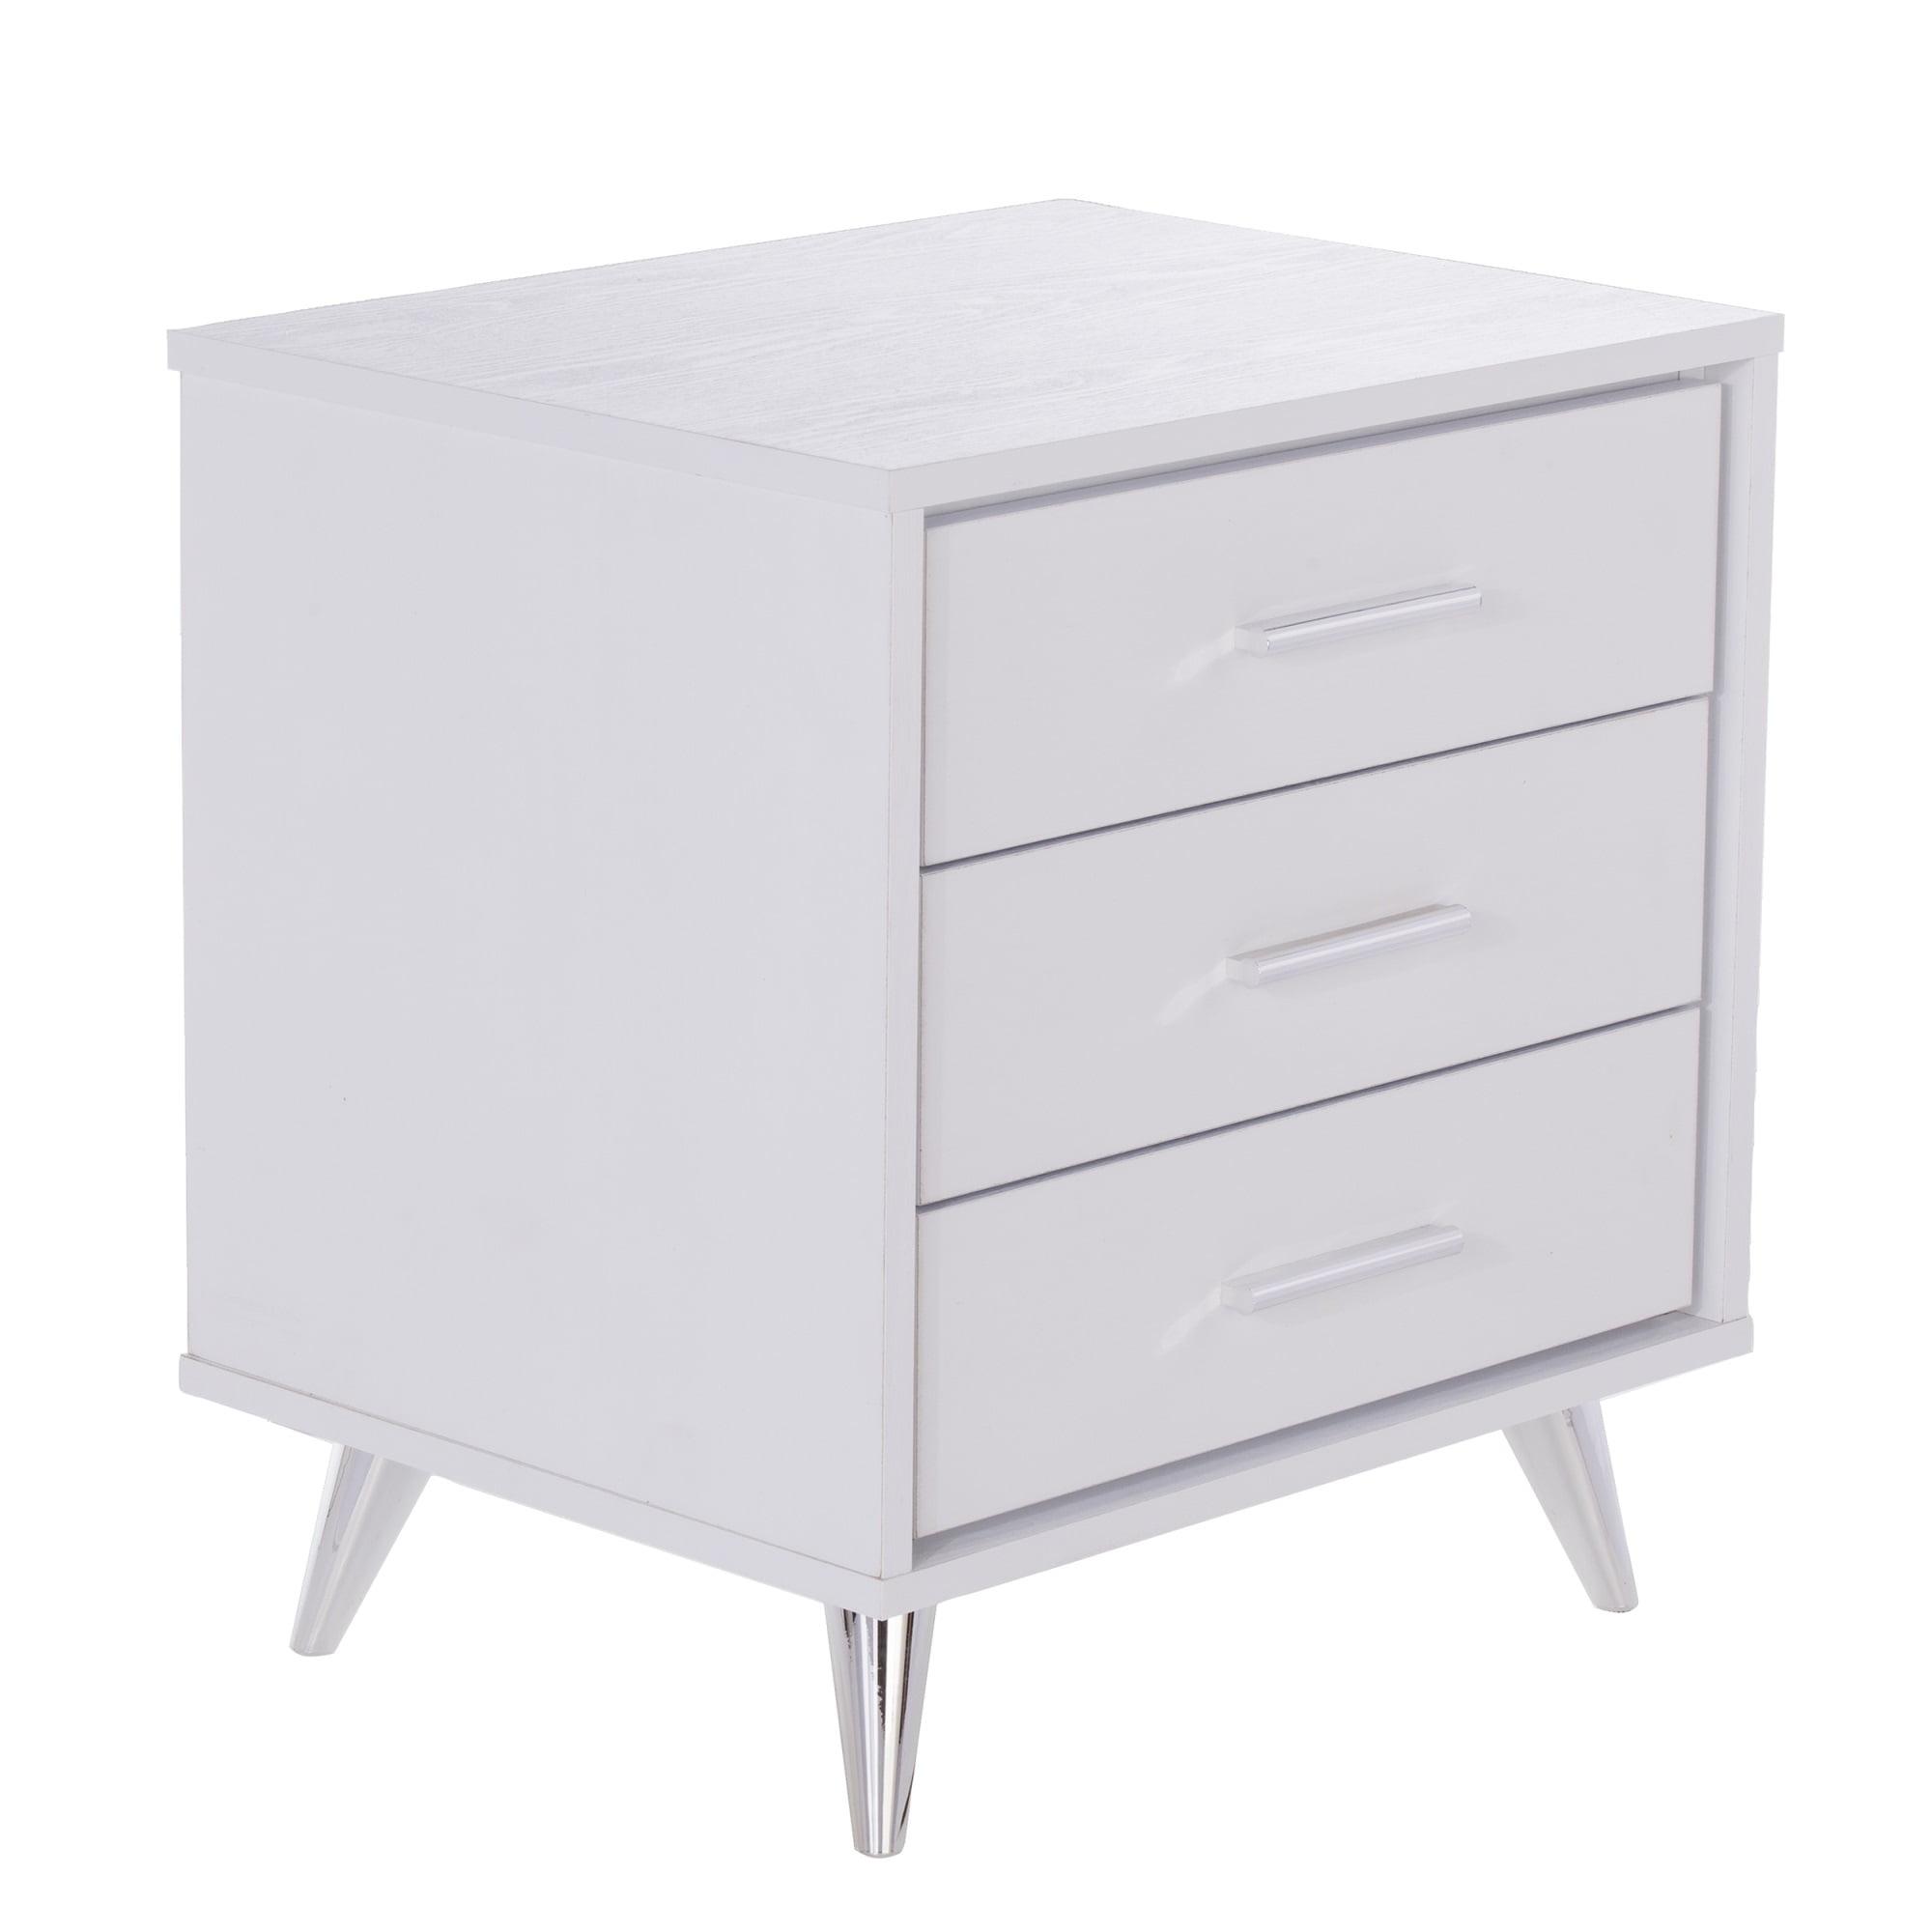 Crisp White Modern 3-Drawer Bedside Nightstand with Chrome Accents